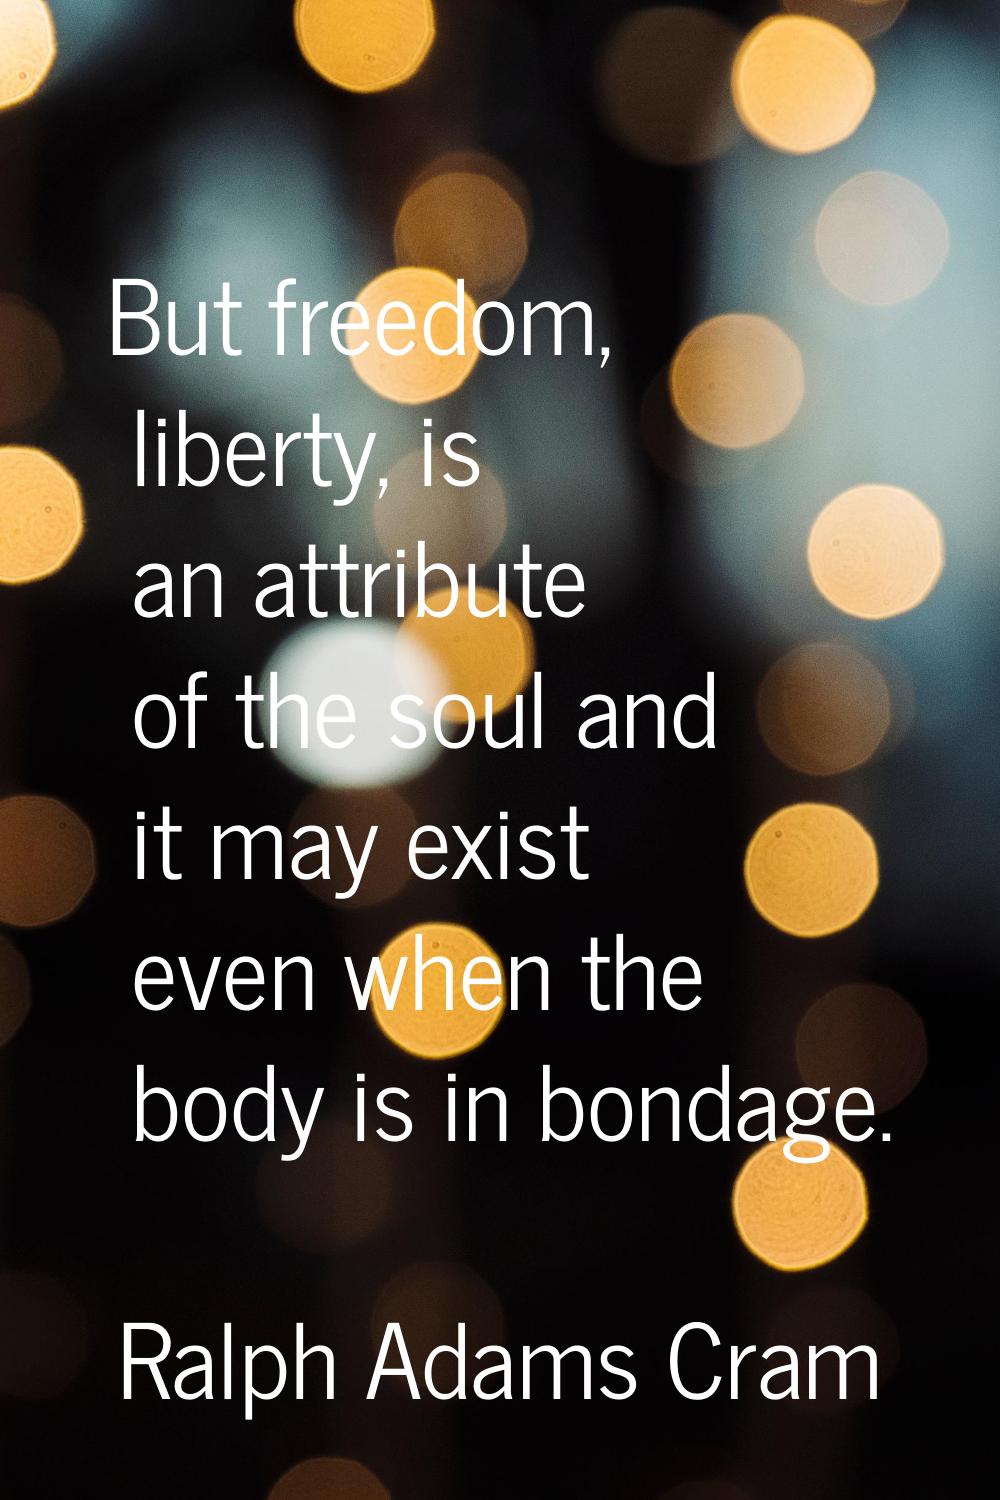 But freedom, liberty, is an attribute of the soul and it may exist even when the body is in bondage